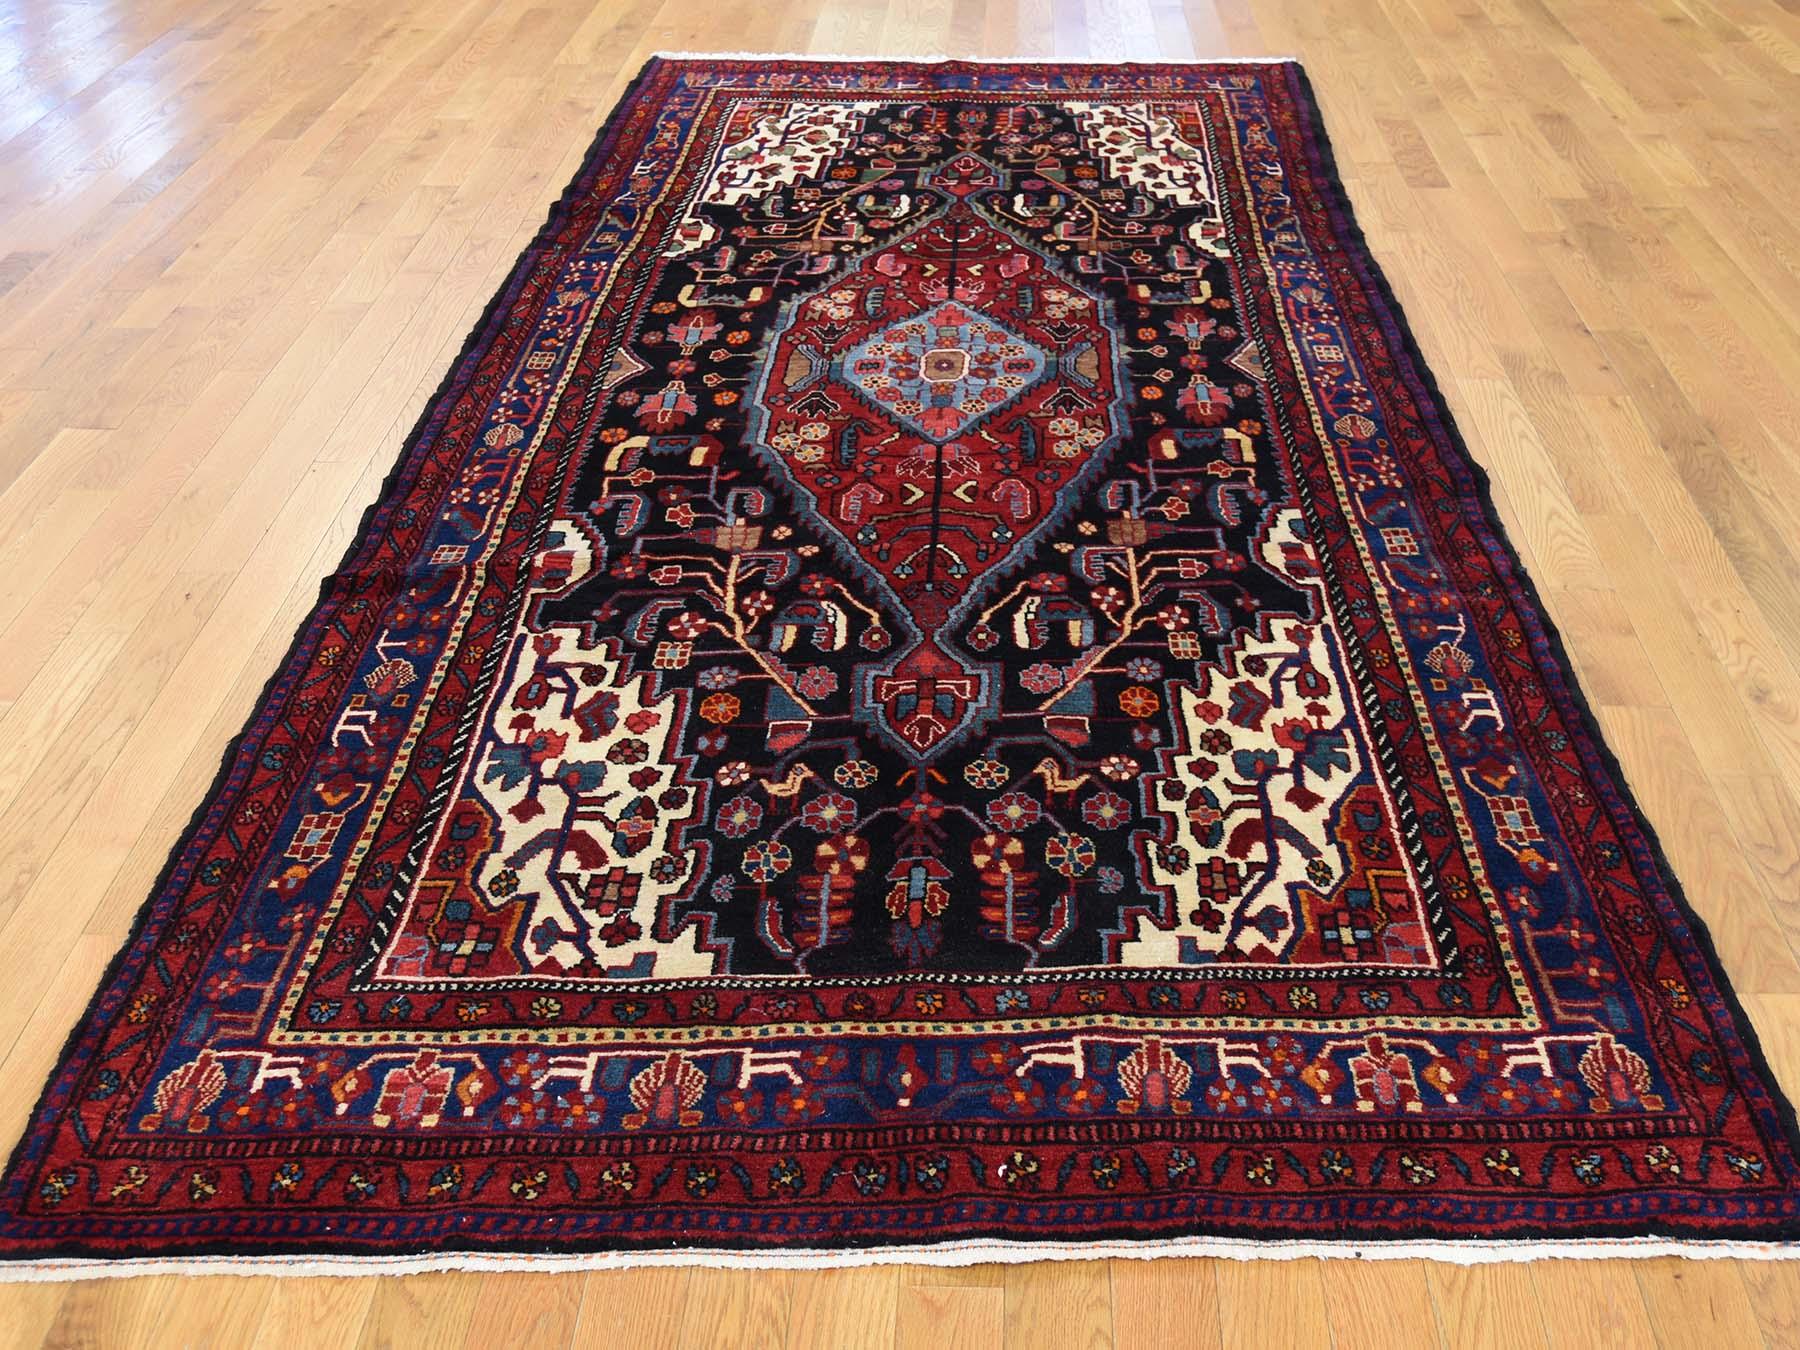 This is a truly genuine one-of-a-kind Semi antique Persian Nahavand hand knotted wide runner rug. It has been knotted for months and months in the centuries-old Persian weaving craftsmanship techniques by expert artisans.

Primary materials: